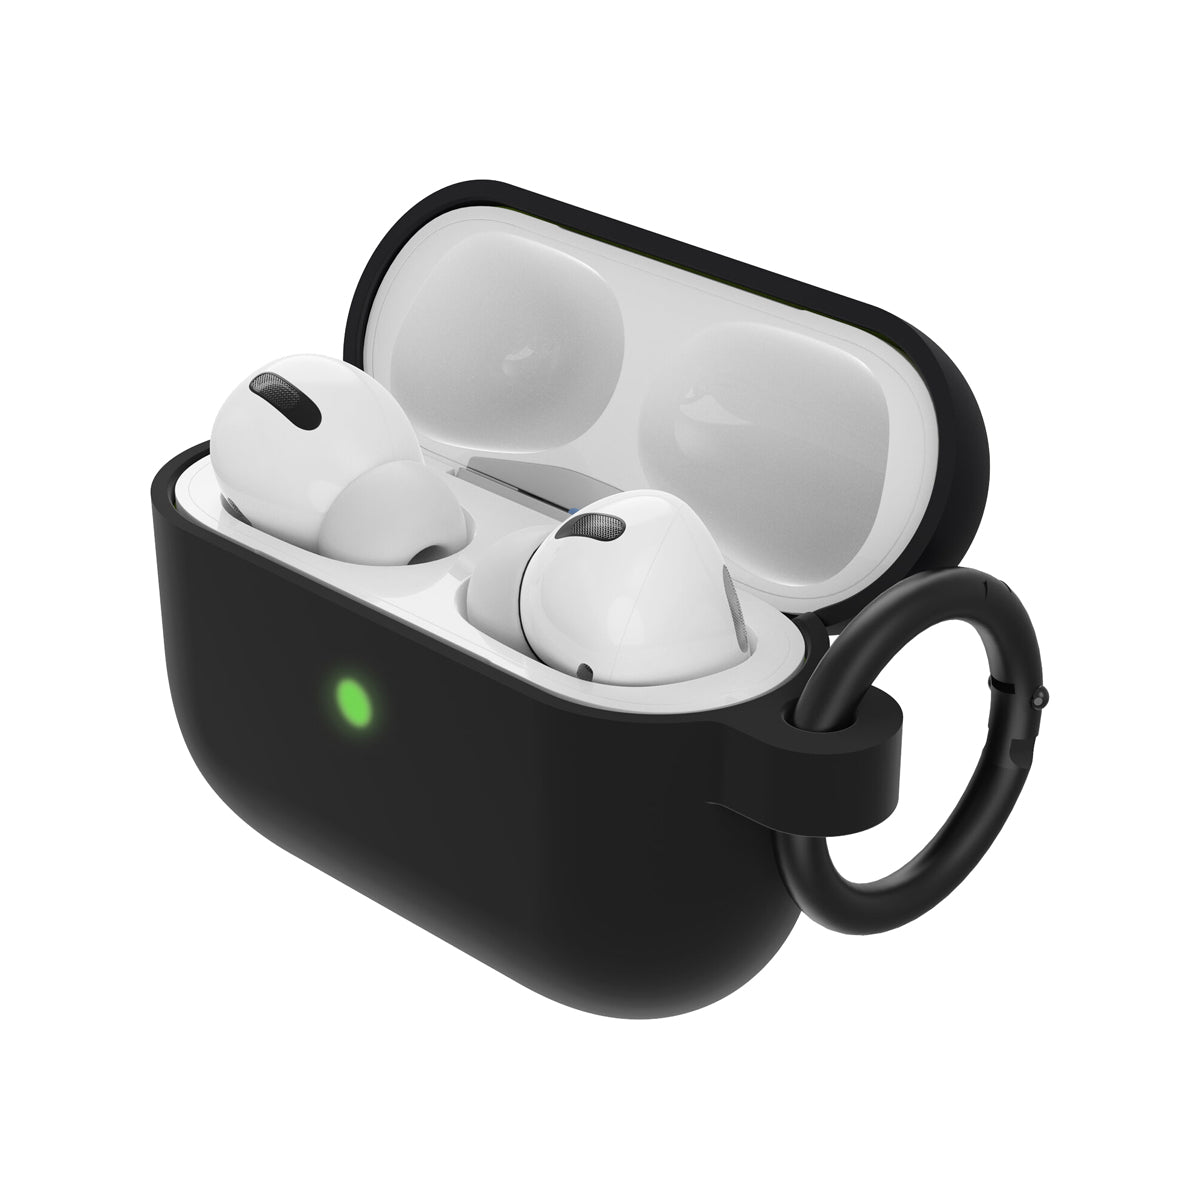 Otterbox Soft Touch Audio Case for AirPods Pro - Black Taffy